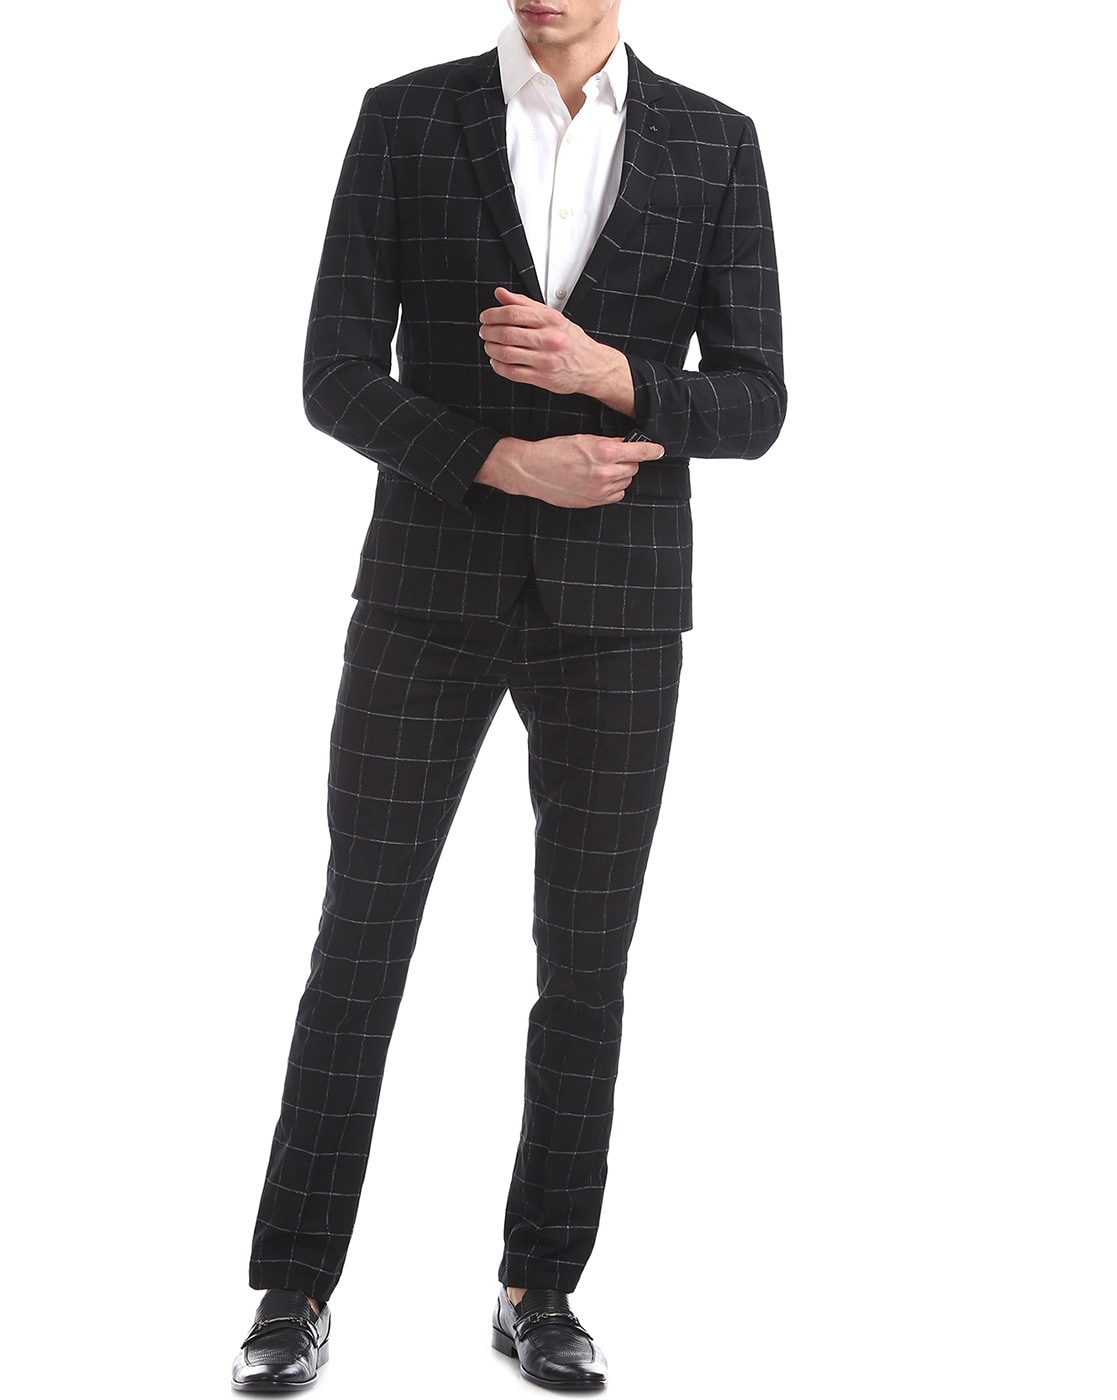 3 piece check suit in brown with black necktie | Mens fashion suits, Mens  fashion suits casual, Menswear